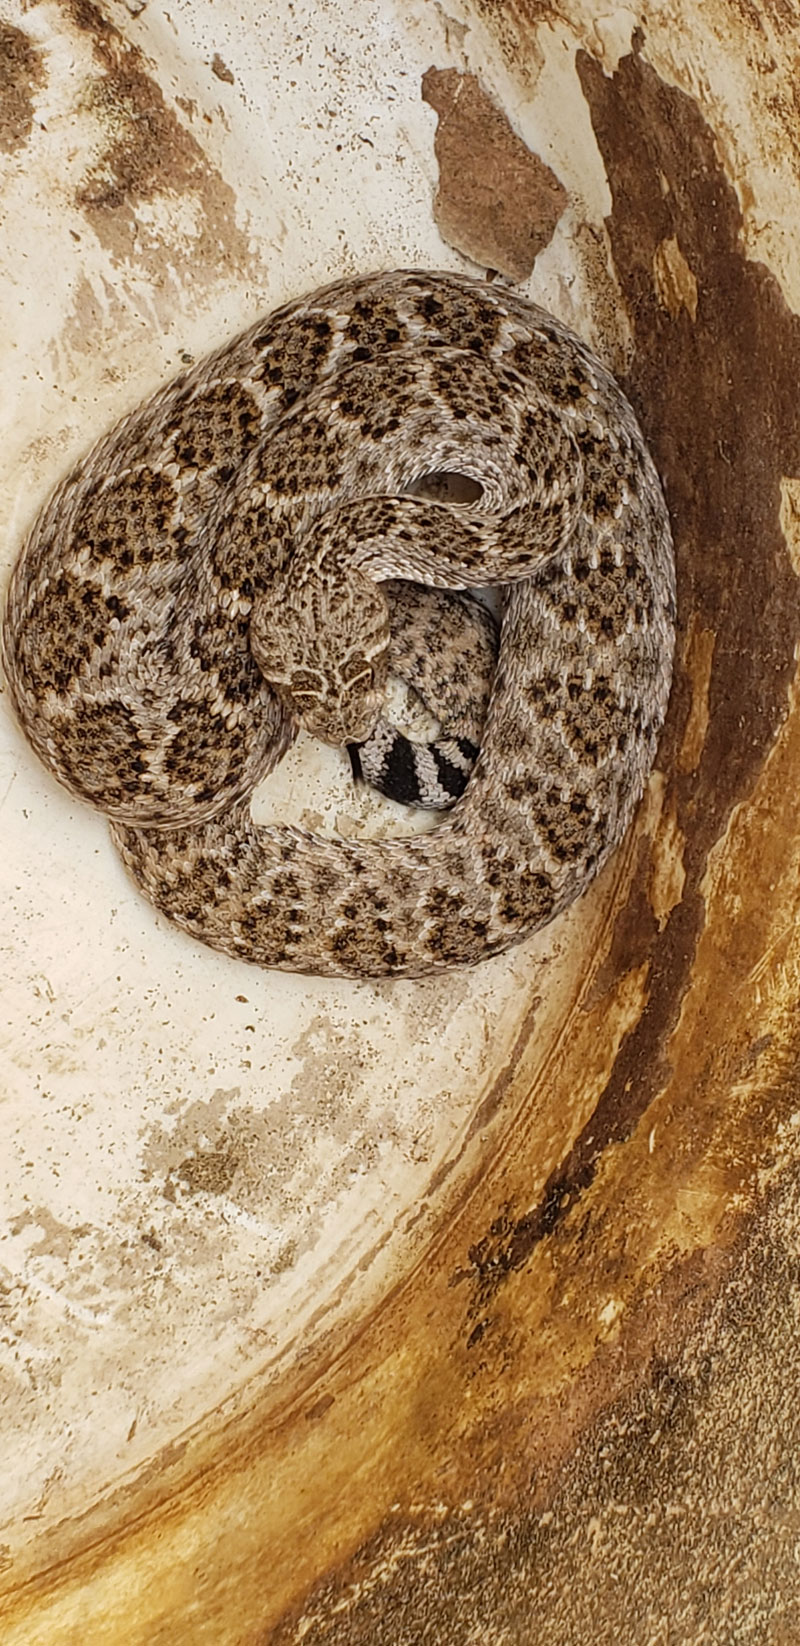 Photo of our sixth rattlesnake of 2019 in a barrel after being captured.